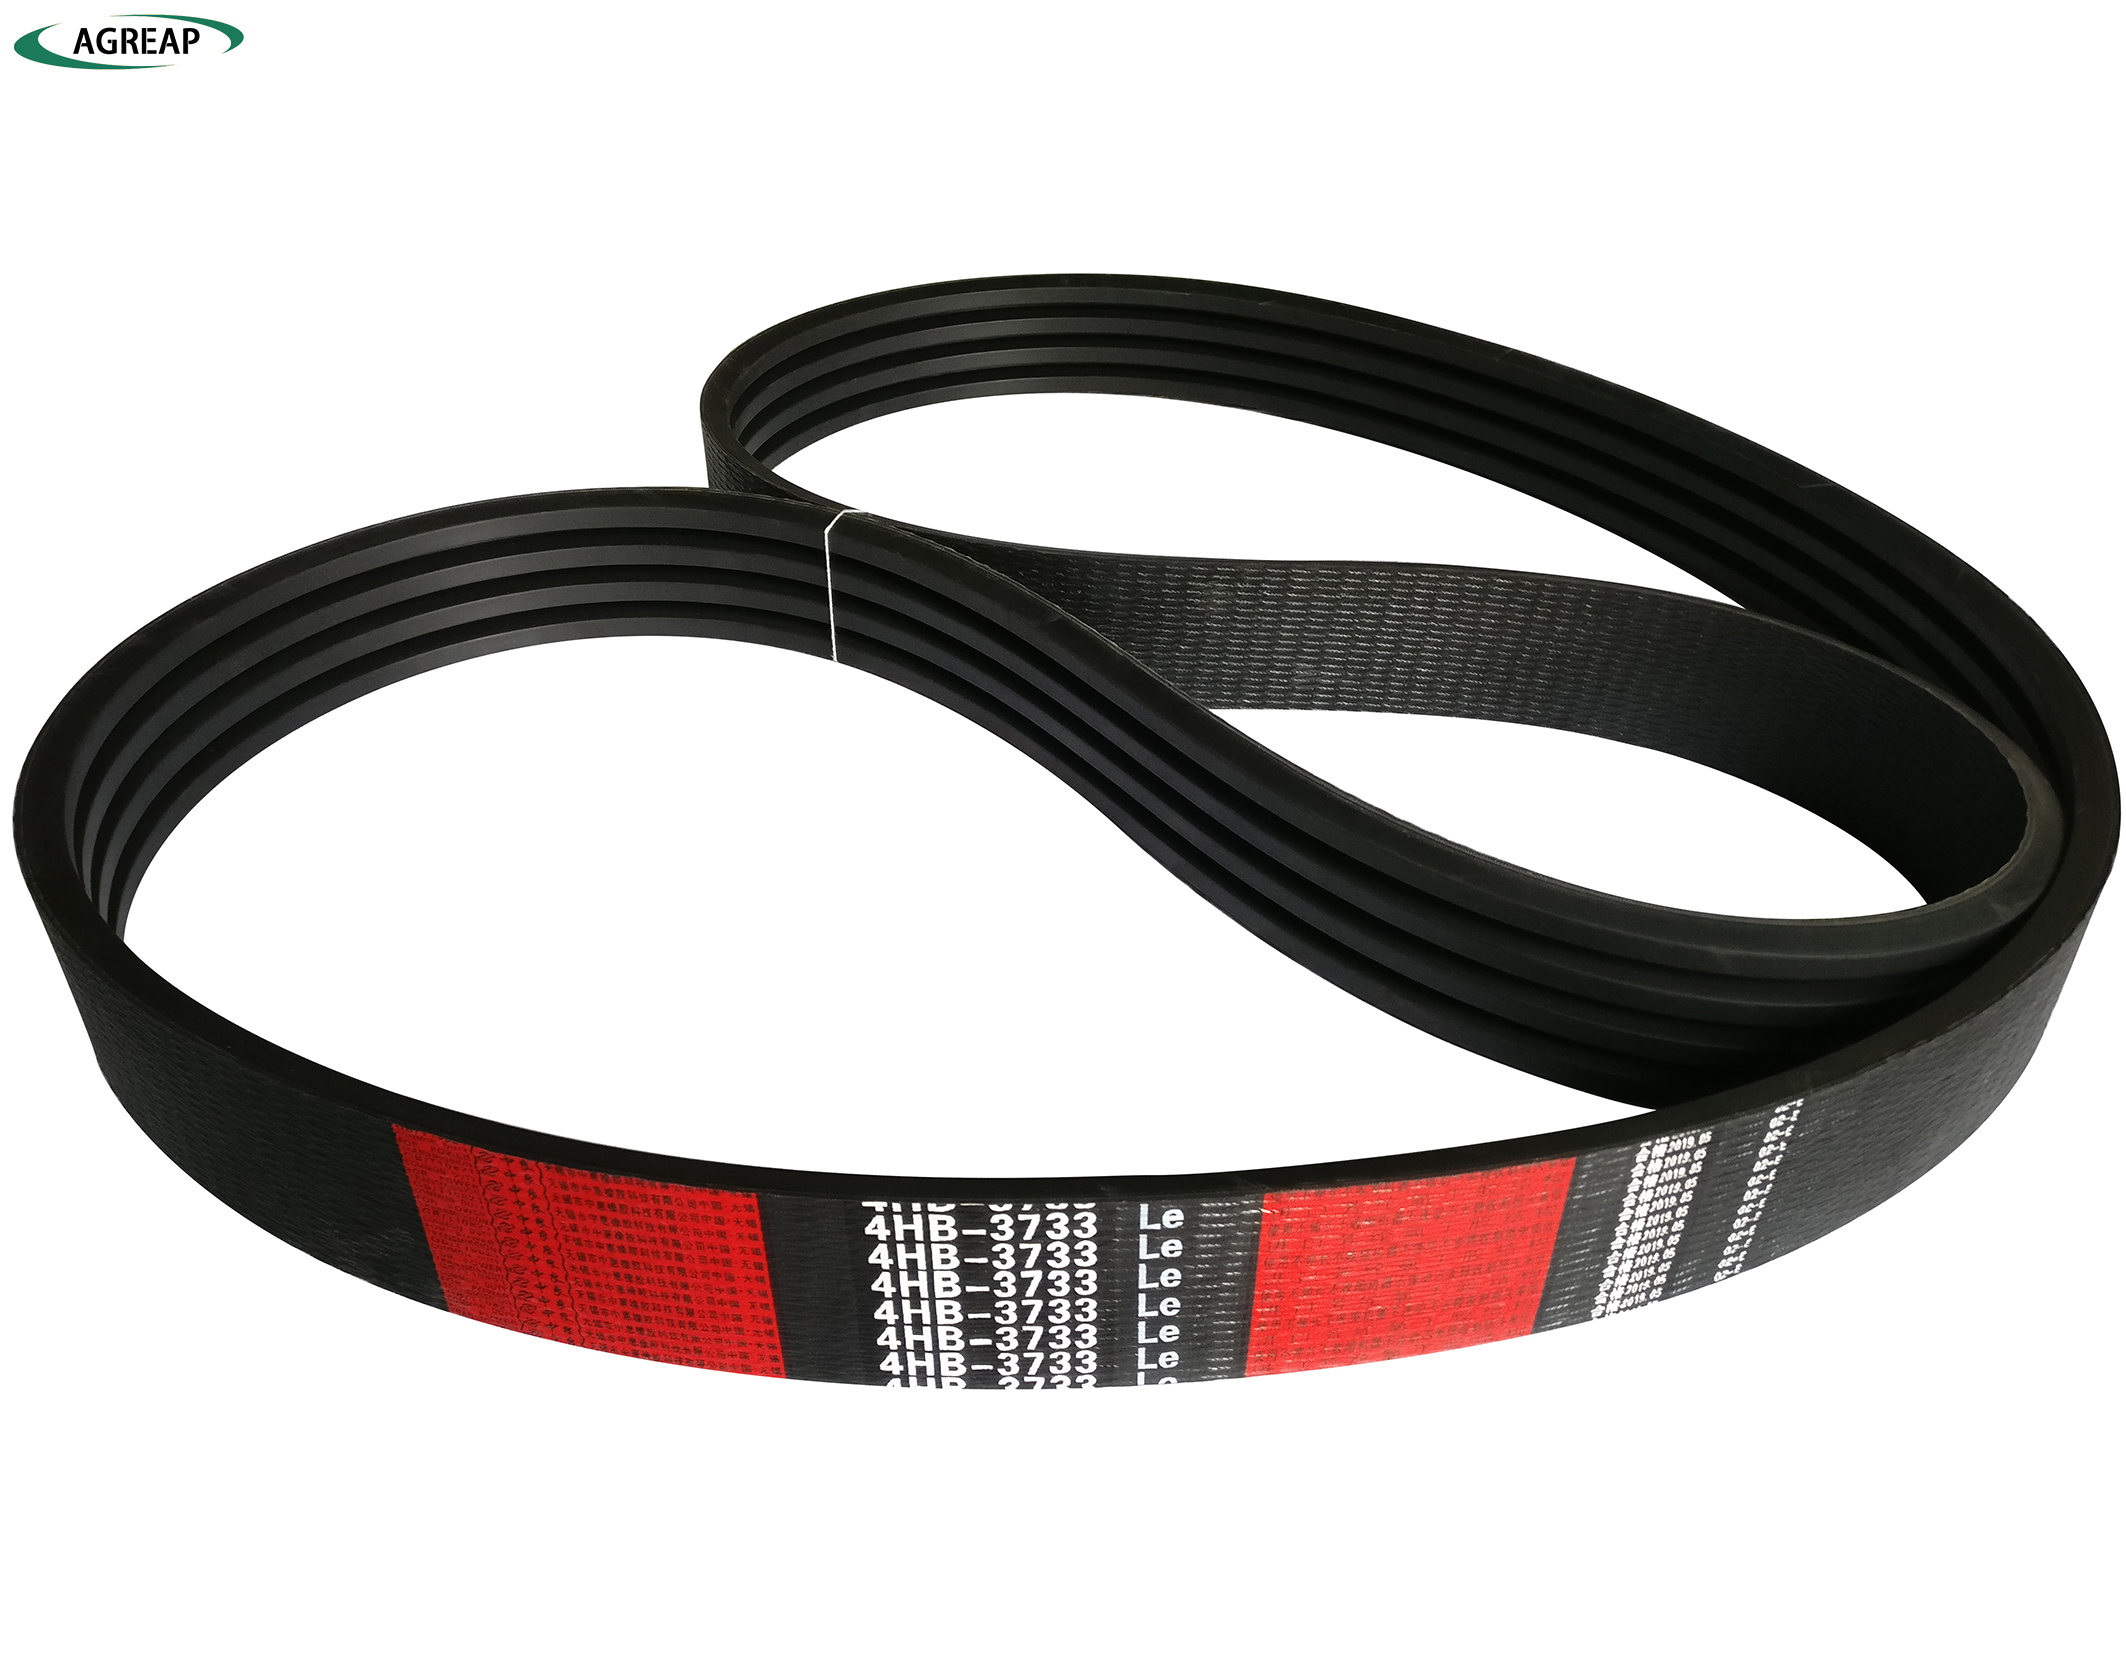 Banded(Joined/Ribbed) Wrapped Belts 2HB, 3HB, 4HB, 5HB, 6HB, 2HC, 3HC, 4HC, 5HC, 6HC 